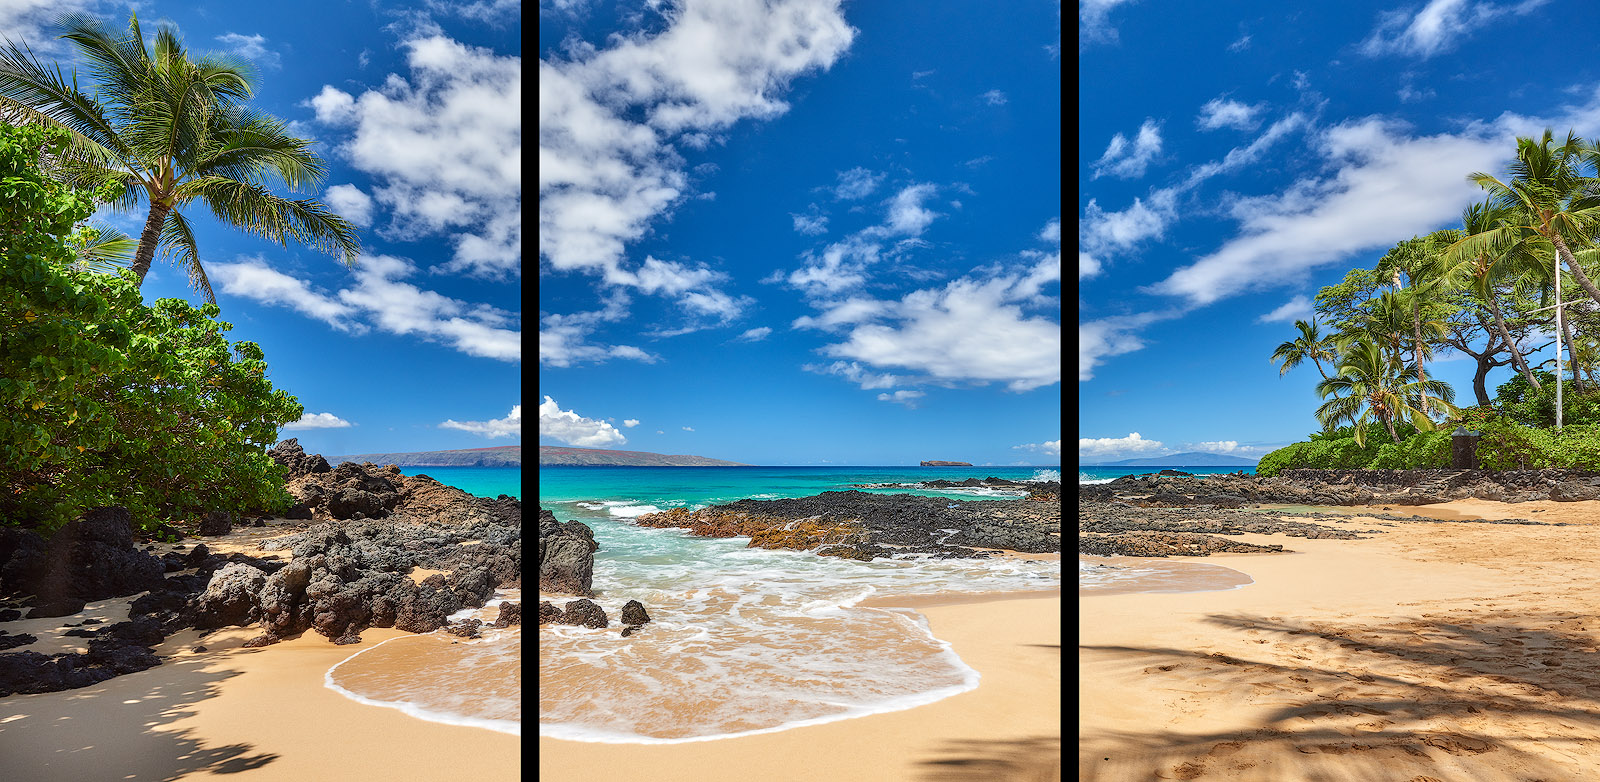 panorama of a perfect morning at Secret Beach (also known as Makena Cove) on the island of Maui, Hawaii.  Blue sky, turquoise water and palm trees 